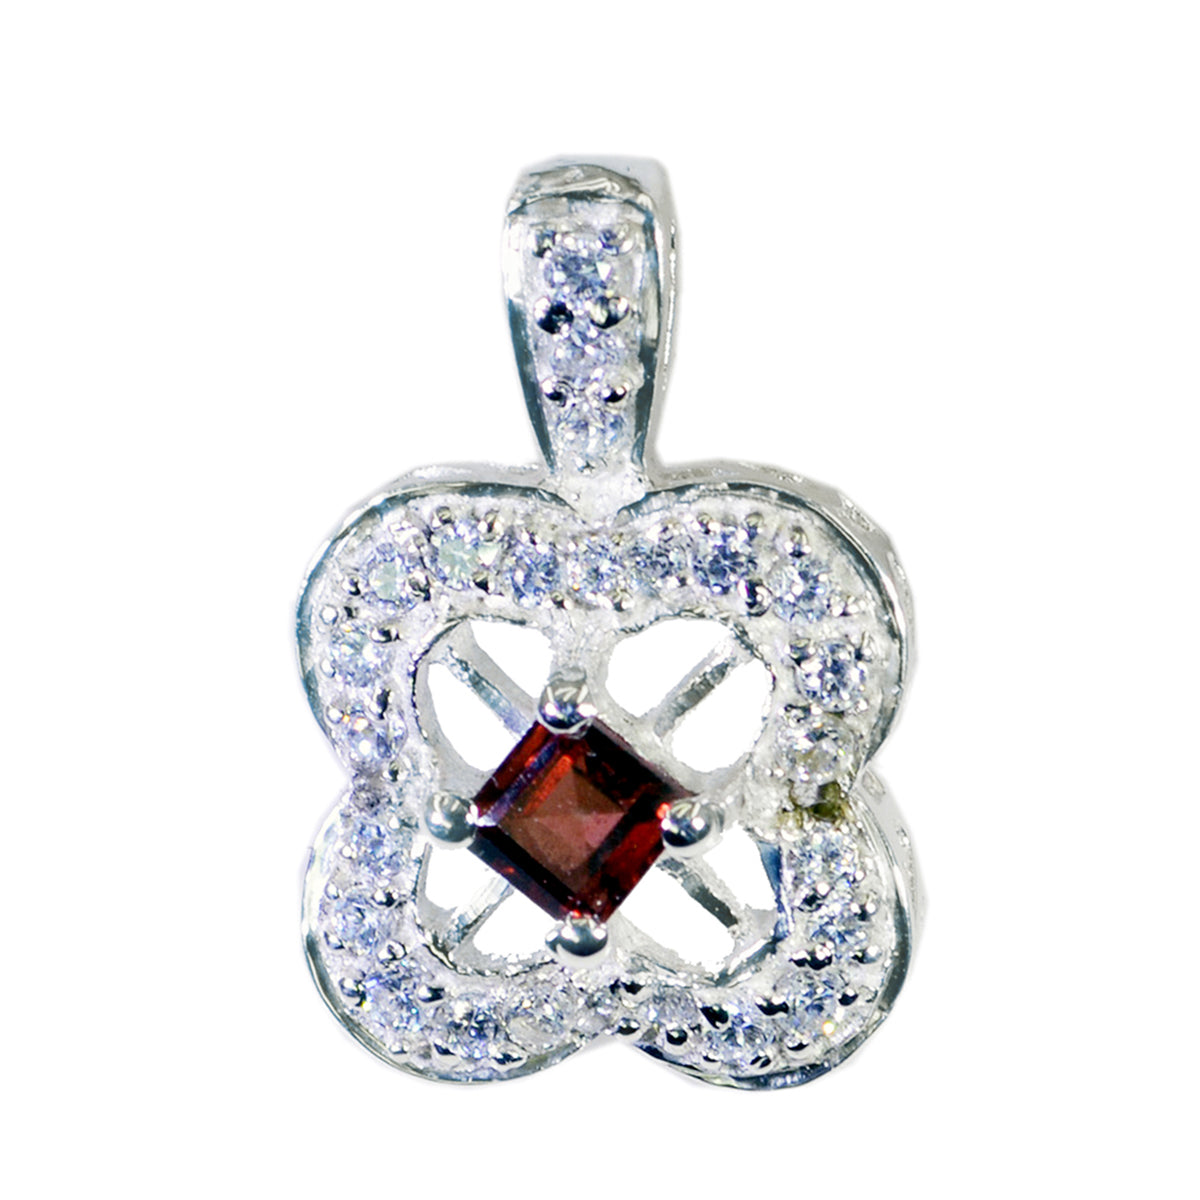 Riyo Hot Gemstone Square Faceted Red Garnet 1050 Sterling Silver Pendant Gift For Good Friday